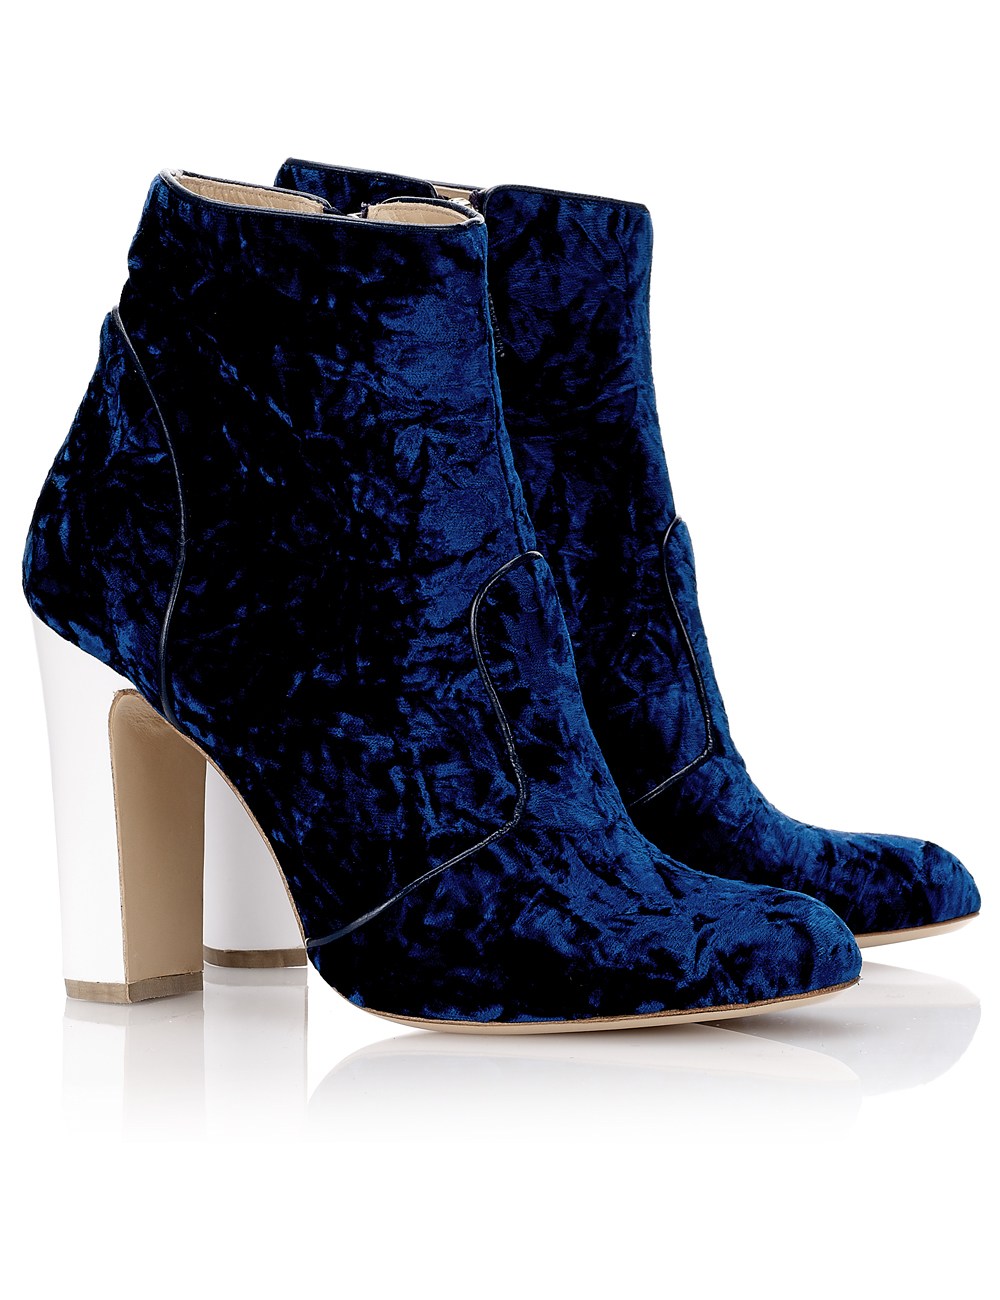 Velvet-Boots3 Top 10 Most Stylish Boot Trends